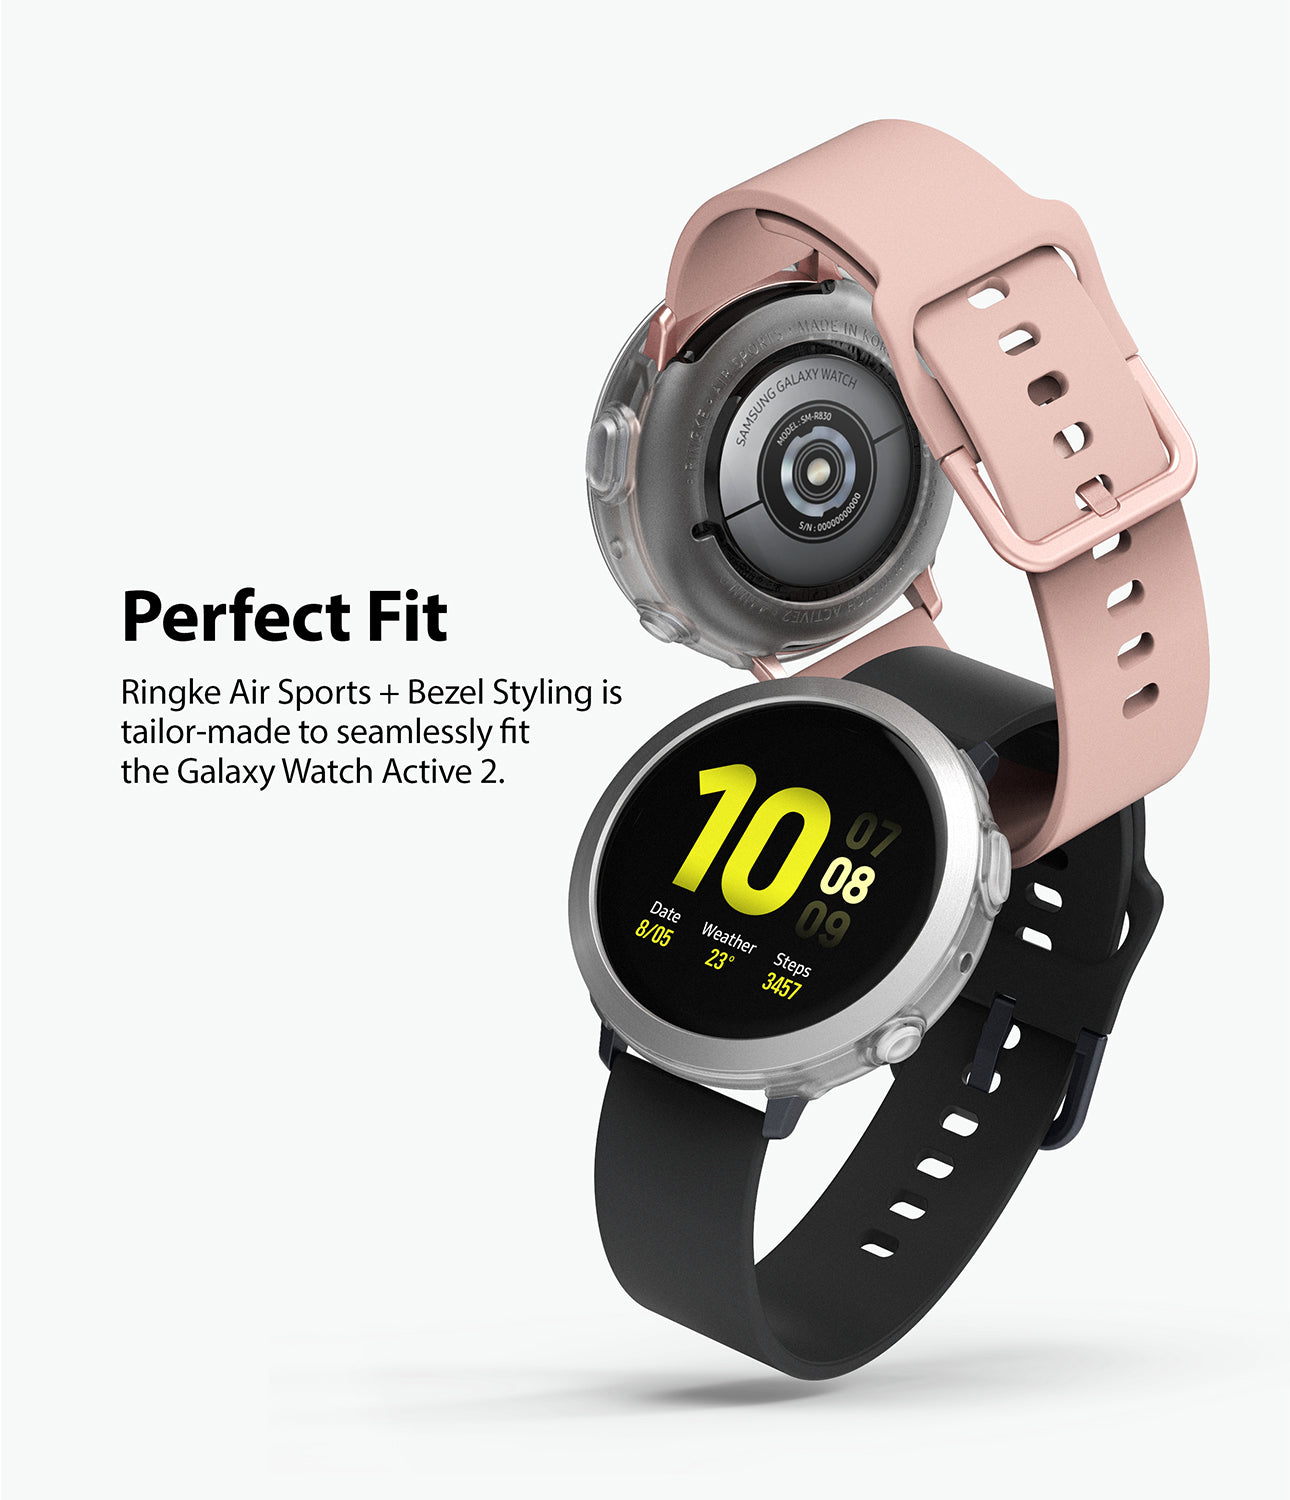 perfect fit - ringke air sports with bezel styling is tailor made to seamlessly fit the galaxy watch active 2